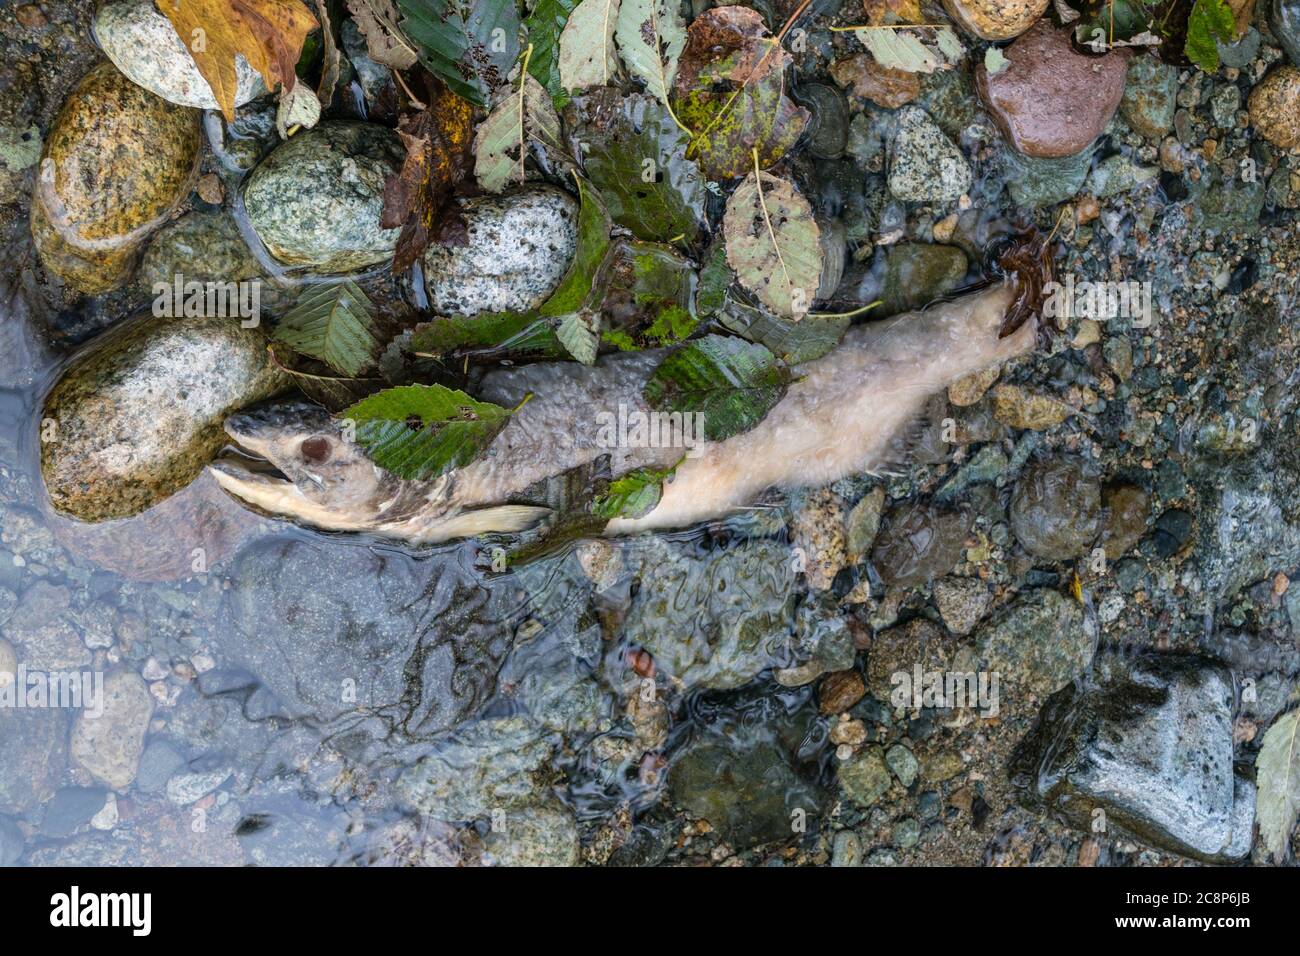 Squamish, BC/Canada-October 5, 2019:  Dead salmon in the Stawamus River after the salmon run or salmon migration. These fish travel many miles upstrea Stock Photo